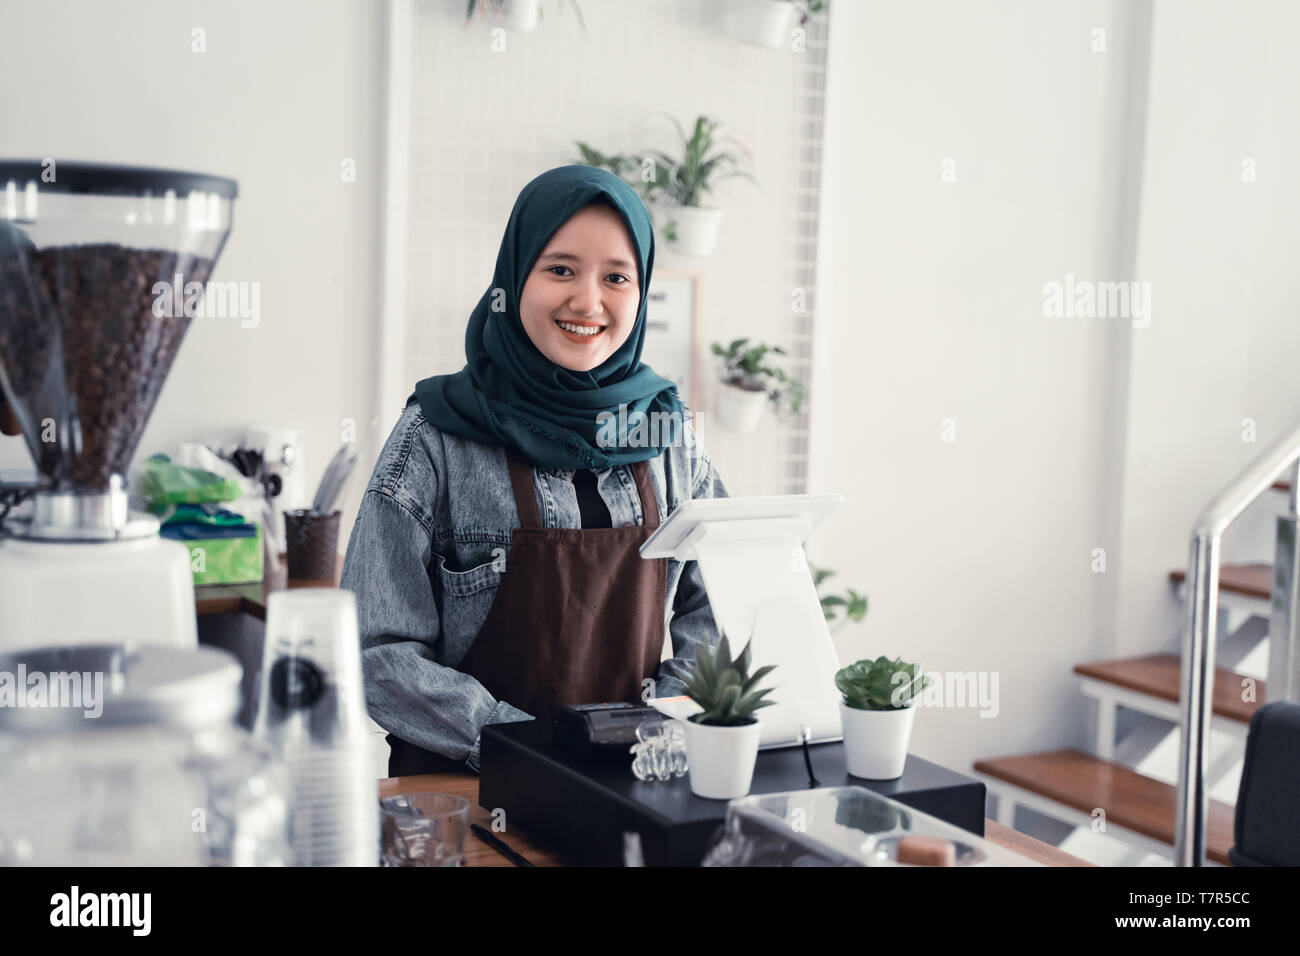 muslim waiter in cafe counter Stock Photo